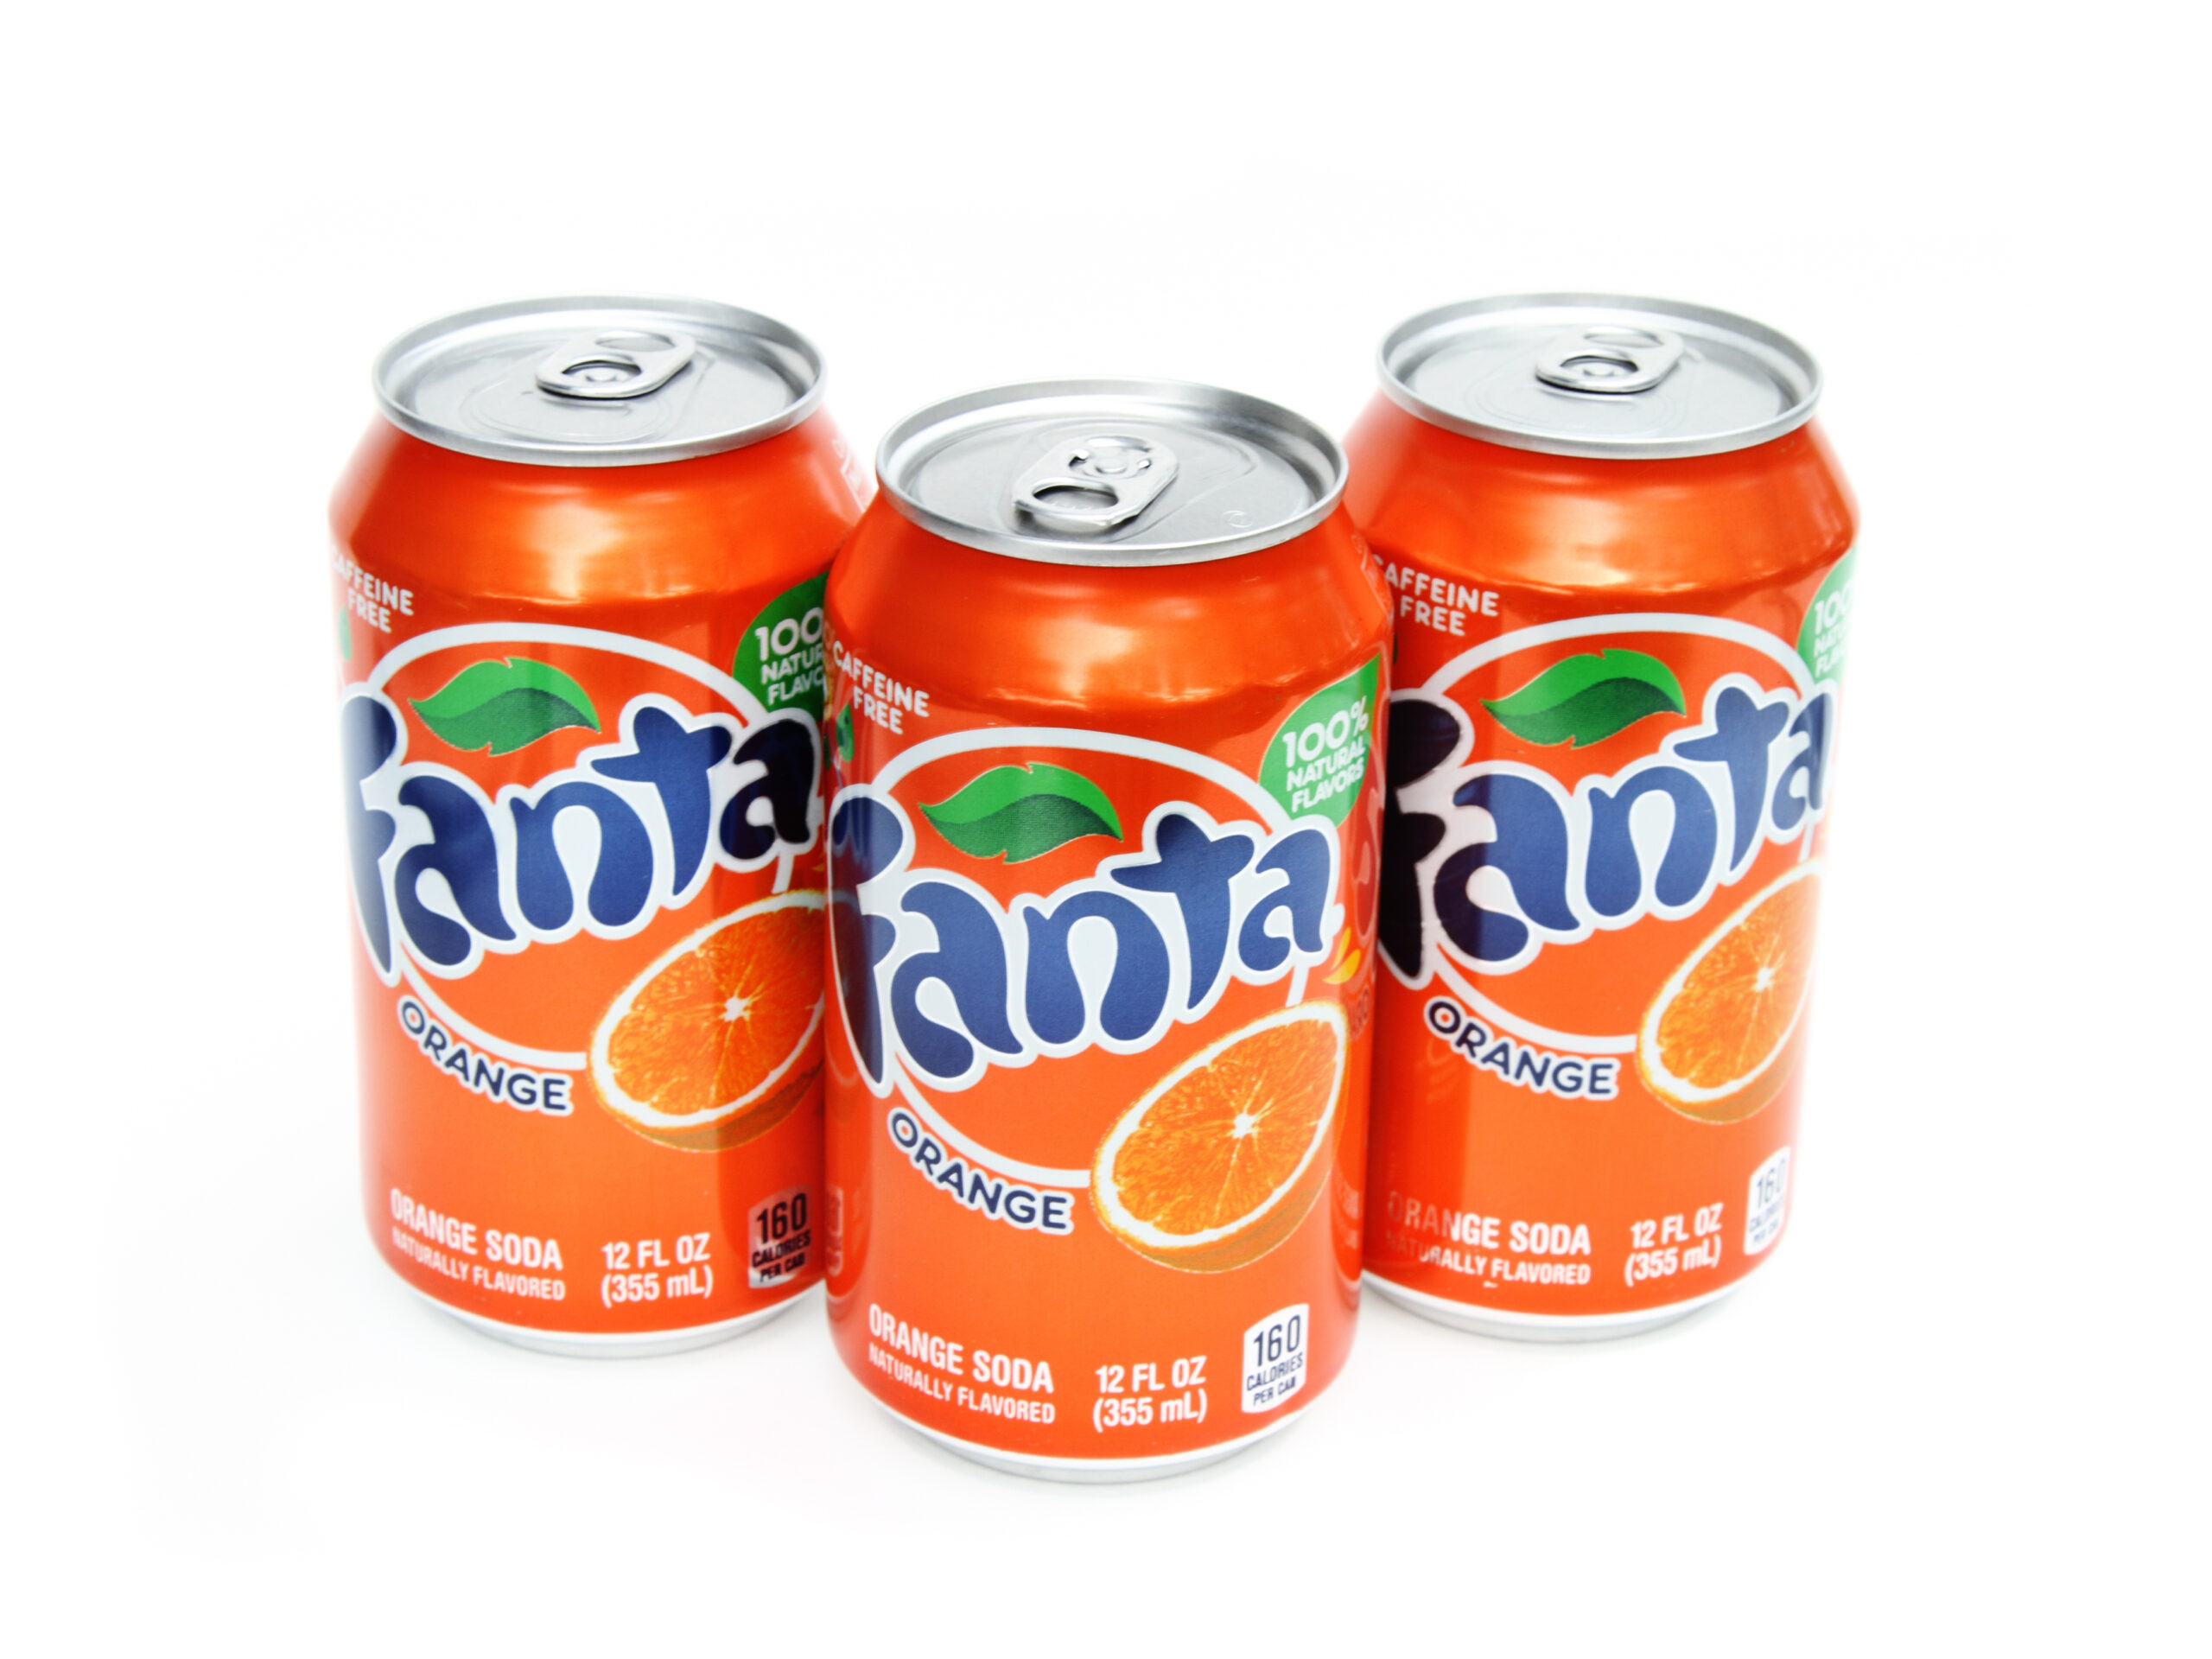 West Palm Beach, USA - December 17, 2011: This is a product shot of three cans of Fanta soda. Fanta is an orange flavored drink that is caffeine free. Fanta is a product of the Coca Cola Company.